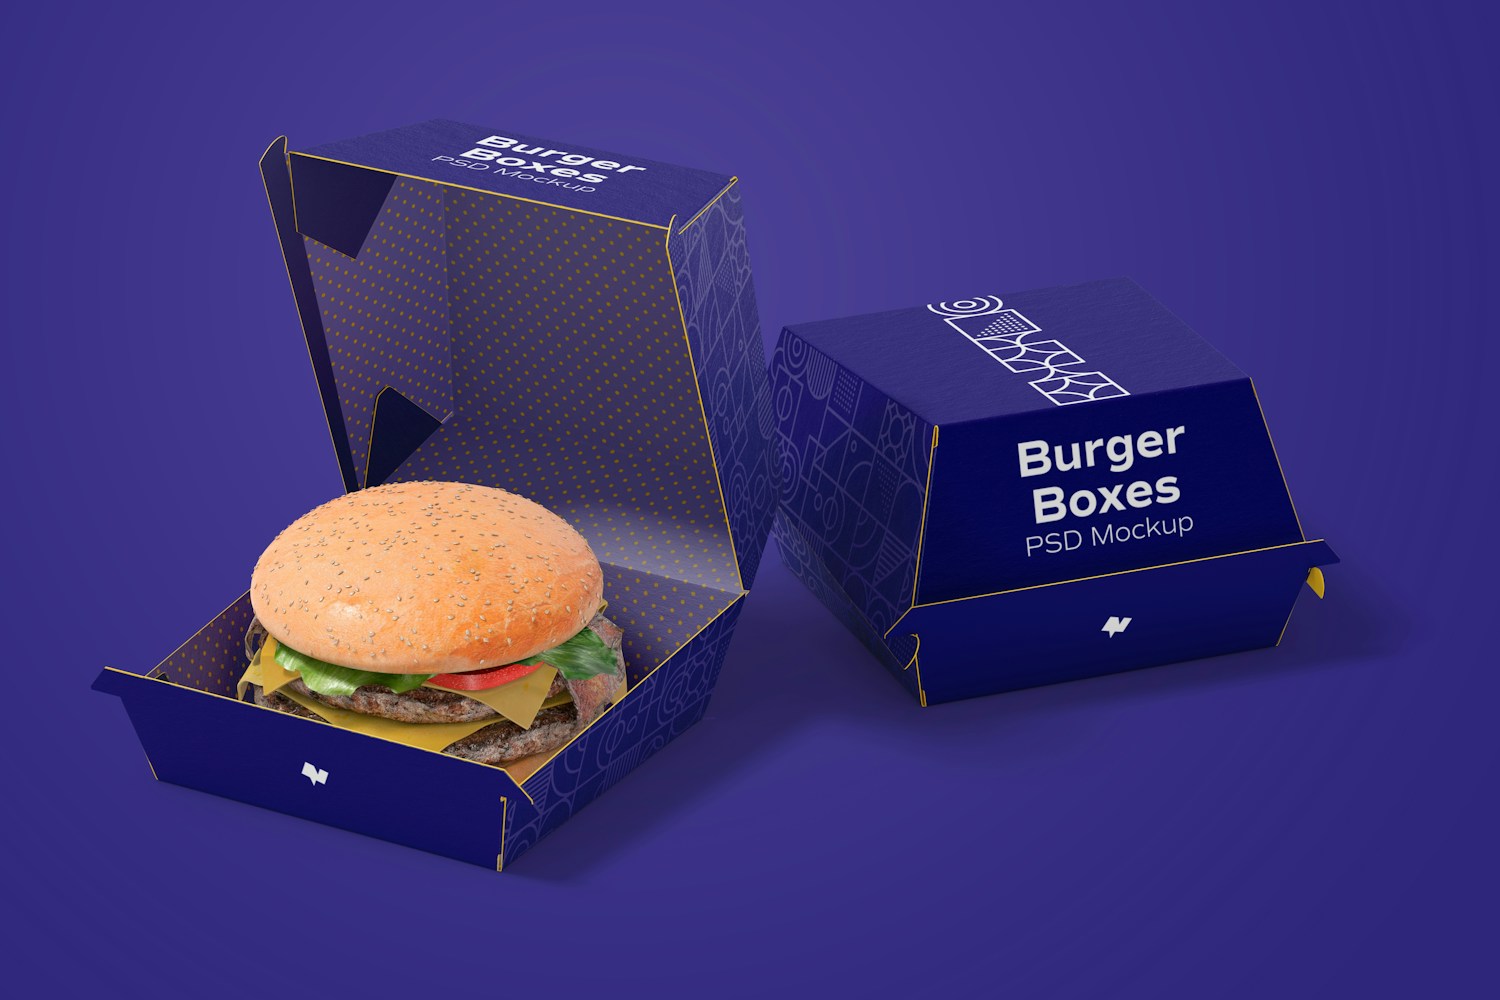 The burger that goes with the boxes is the final touch your design needs to look totally realistic.